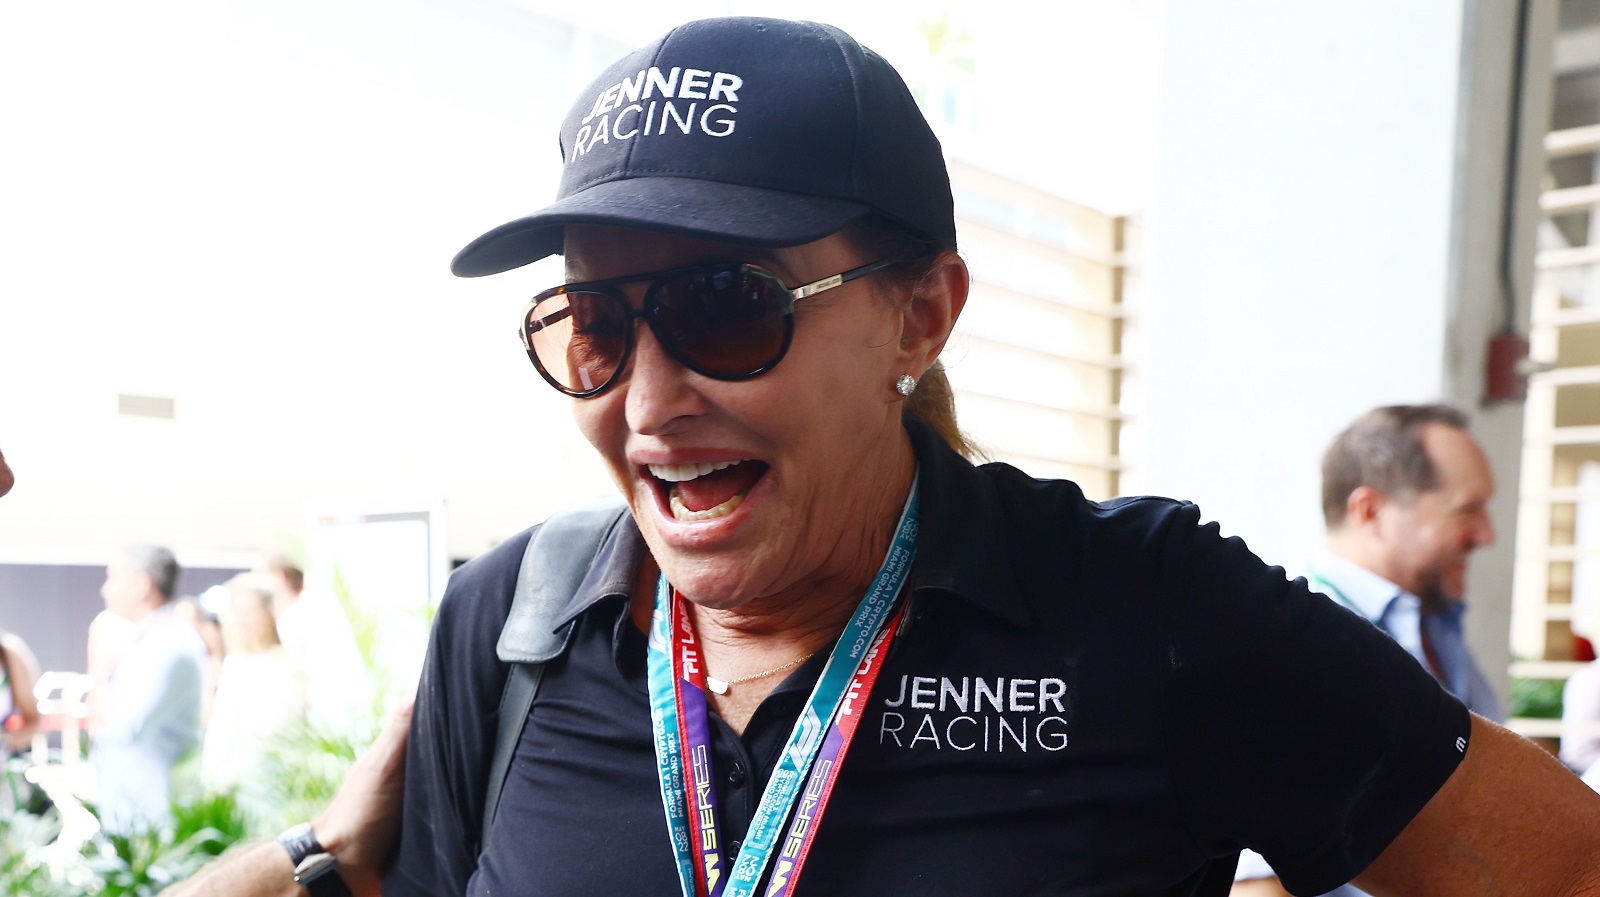 Caitlyn Jenner Kicks off Miami Grand Prix Weekend With a Triumphant Debut as a Team Owner